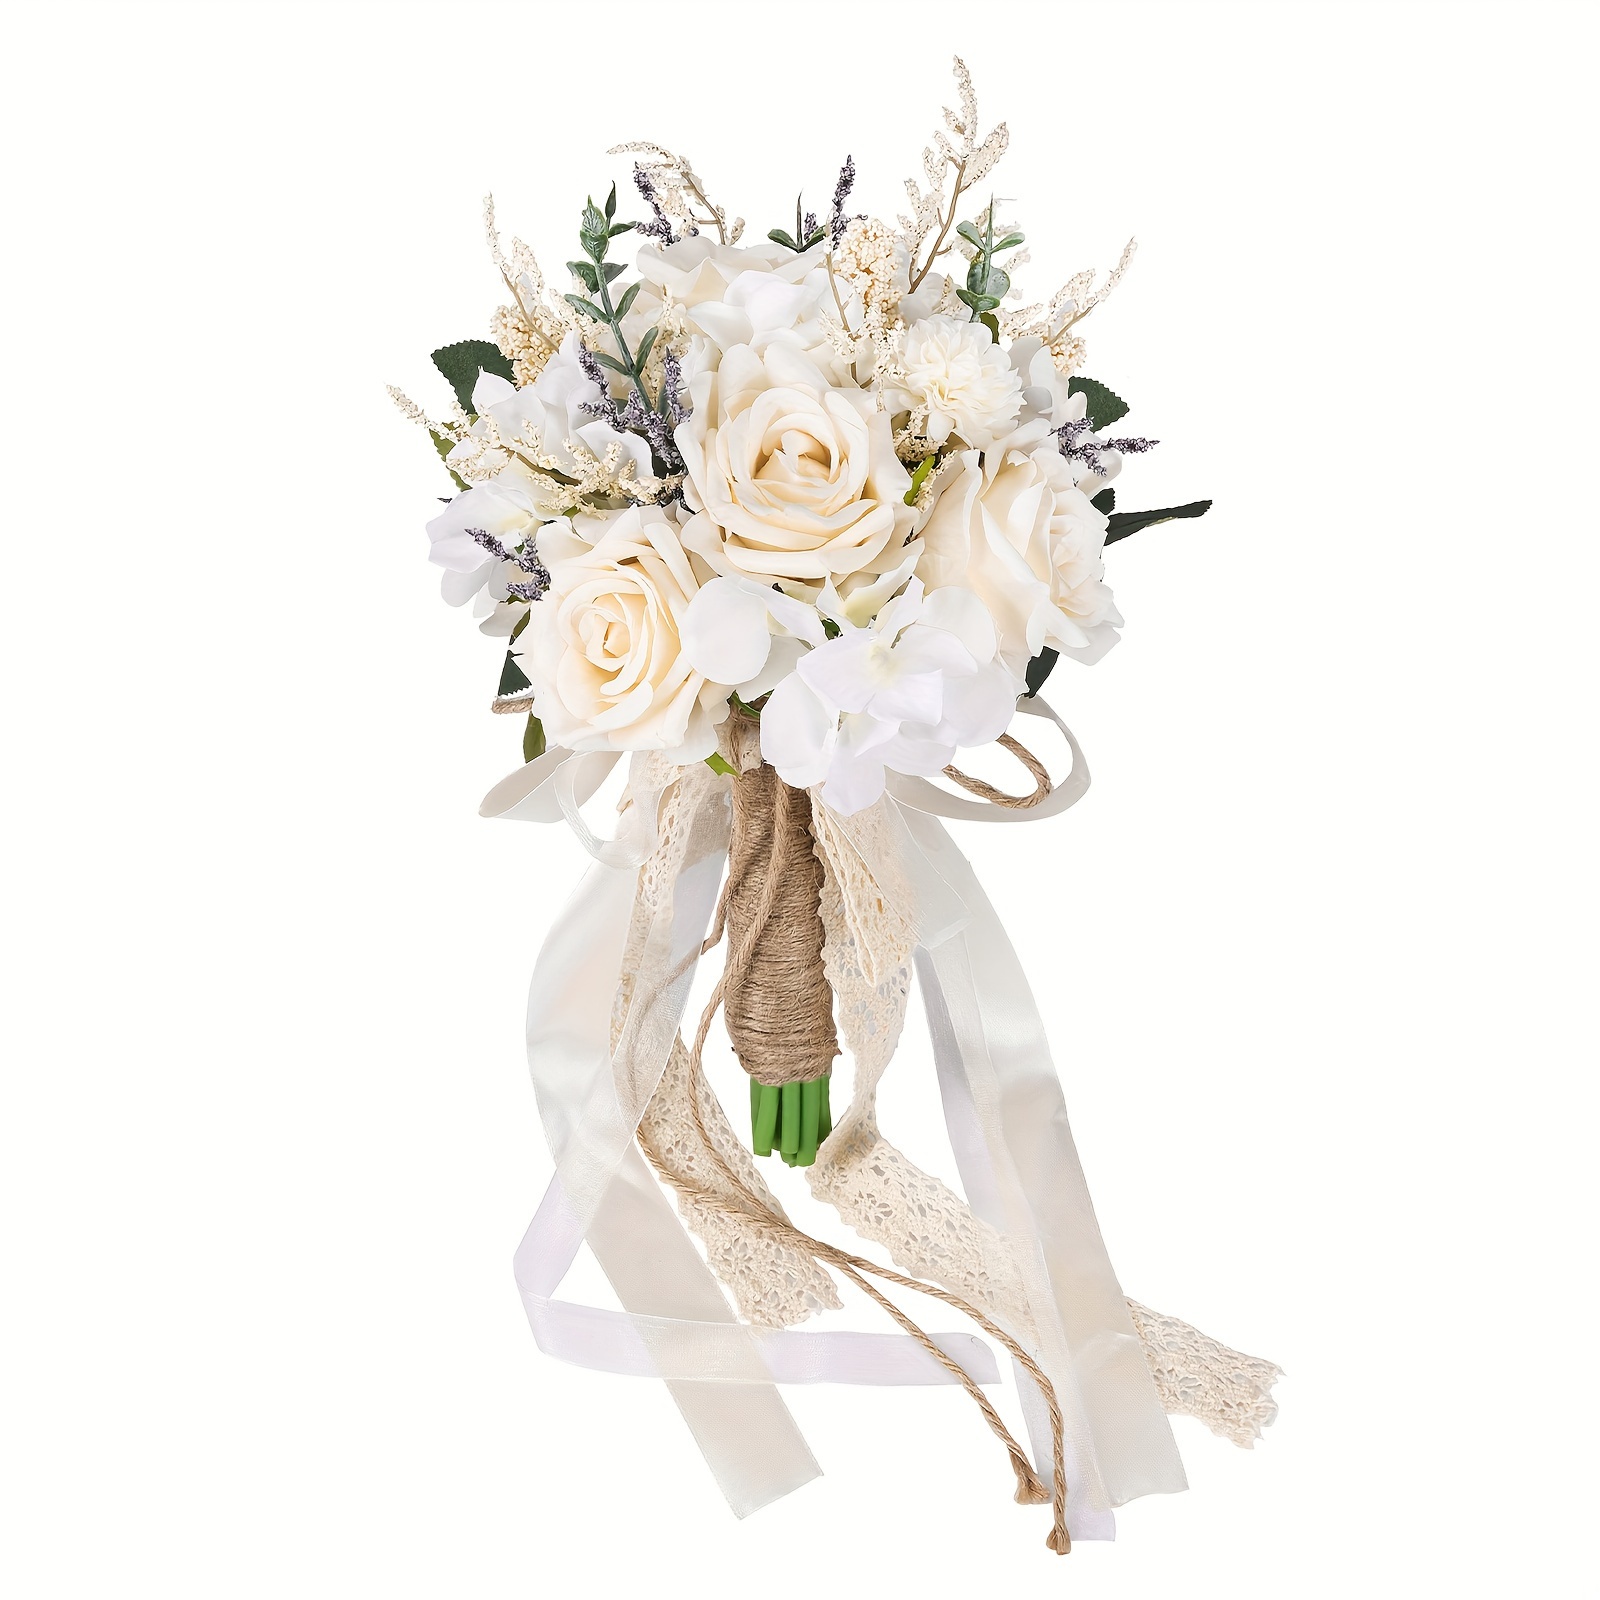 

Wedding Bouquets For Bride Bridesmaid, White Champagne Artificial Roses Flowers Wedding Decoration, Ceremony, Festival, Anniversary, Valentine's Day Gift Or Home Decoration. (8in)